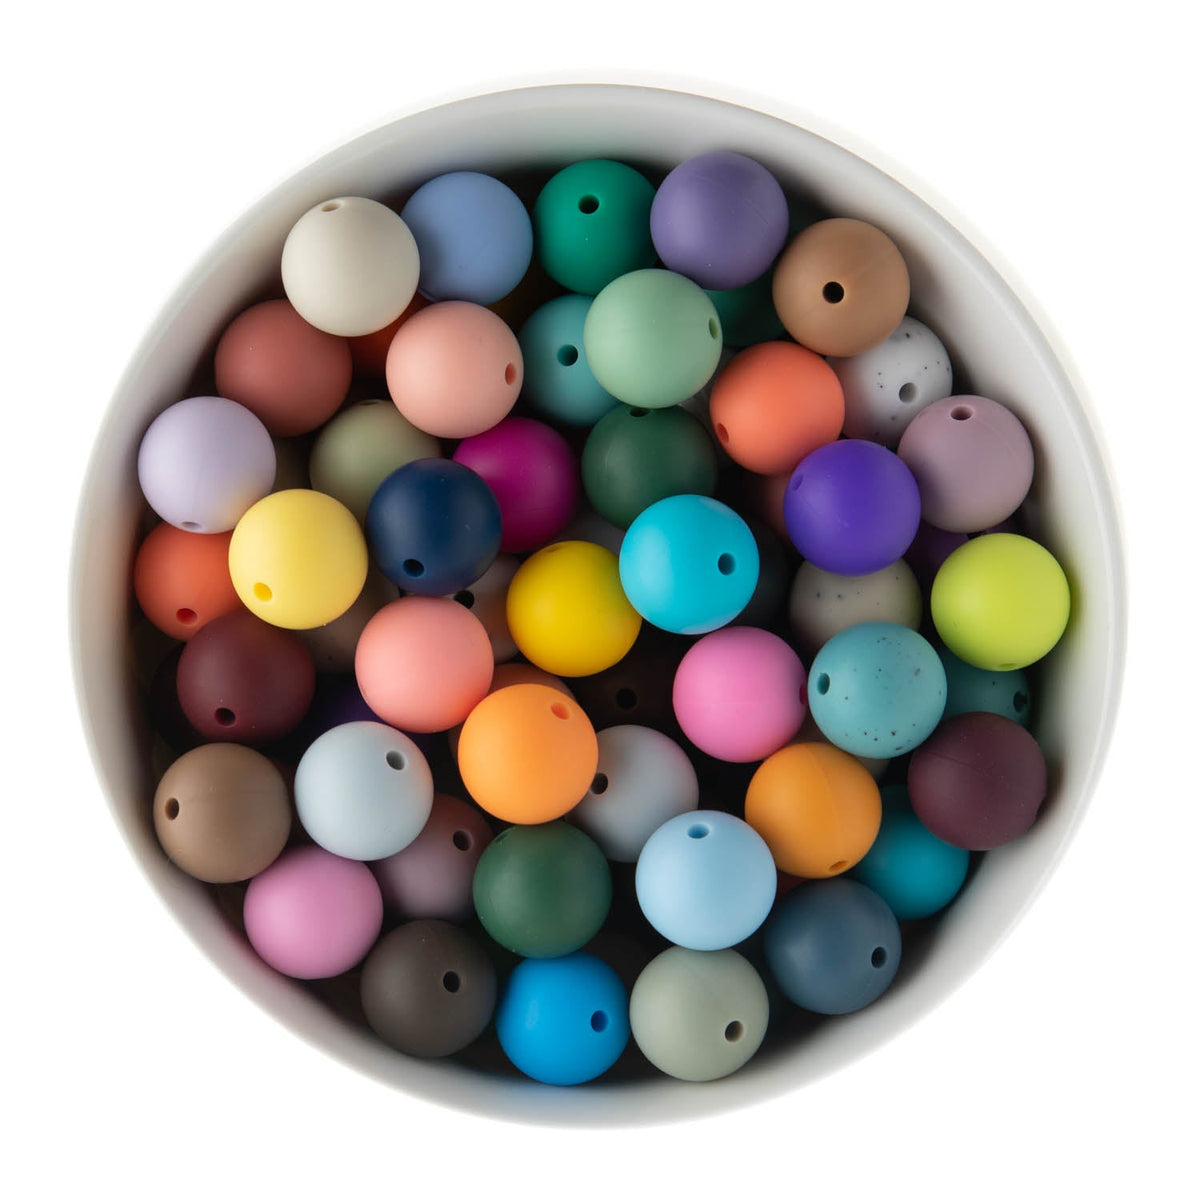 Silicone Beads for Key Pendant Making, 15 mm Silicone Beads Bulk Sunflower  Silicone Beads with for K